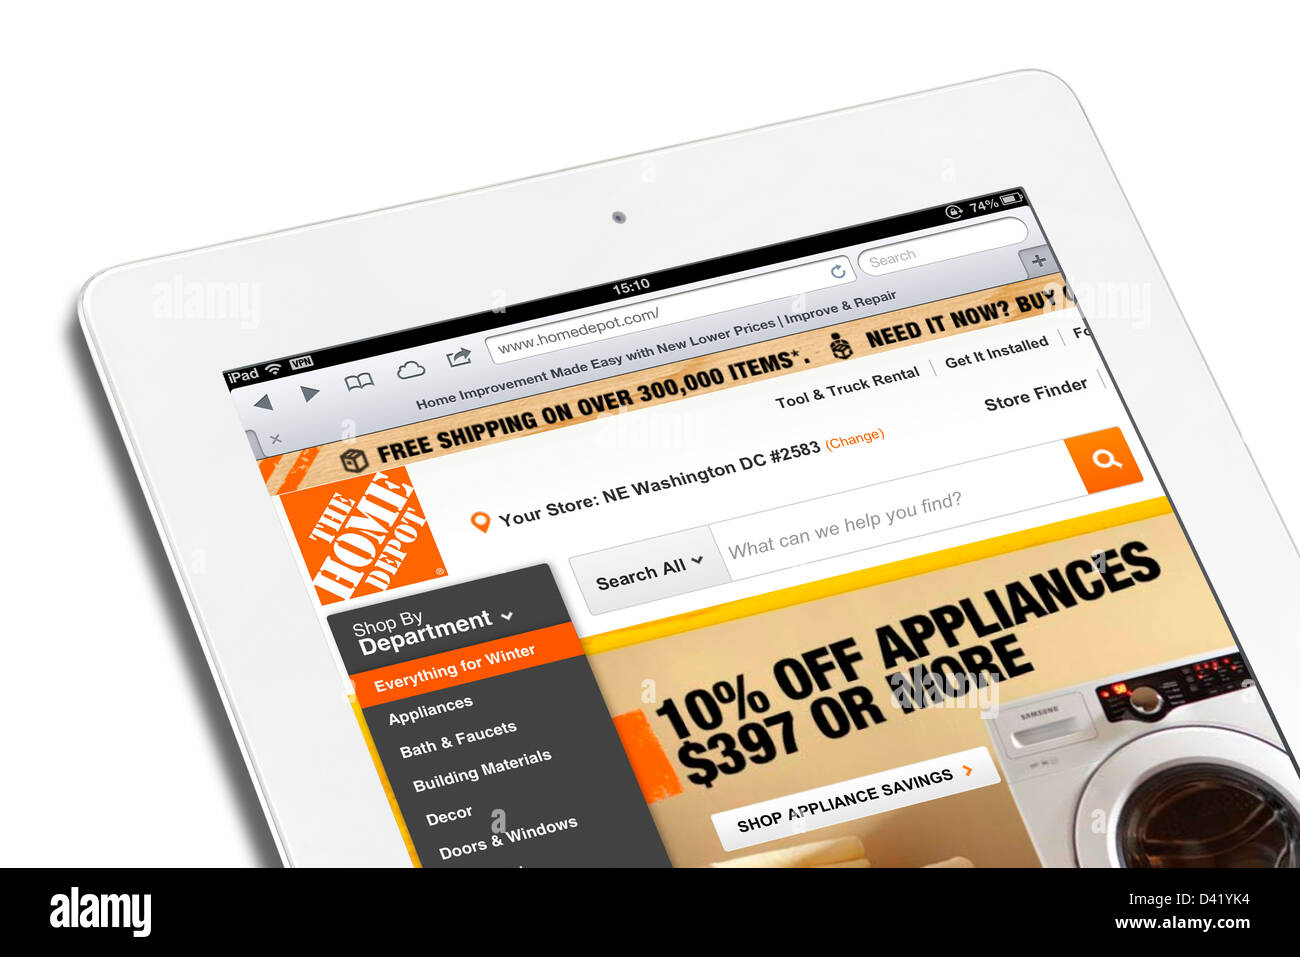 Online shopping website of The Home Depot, viewed on an iPad 4, USA